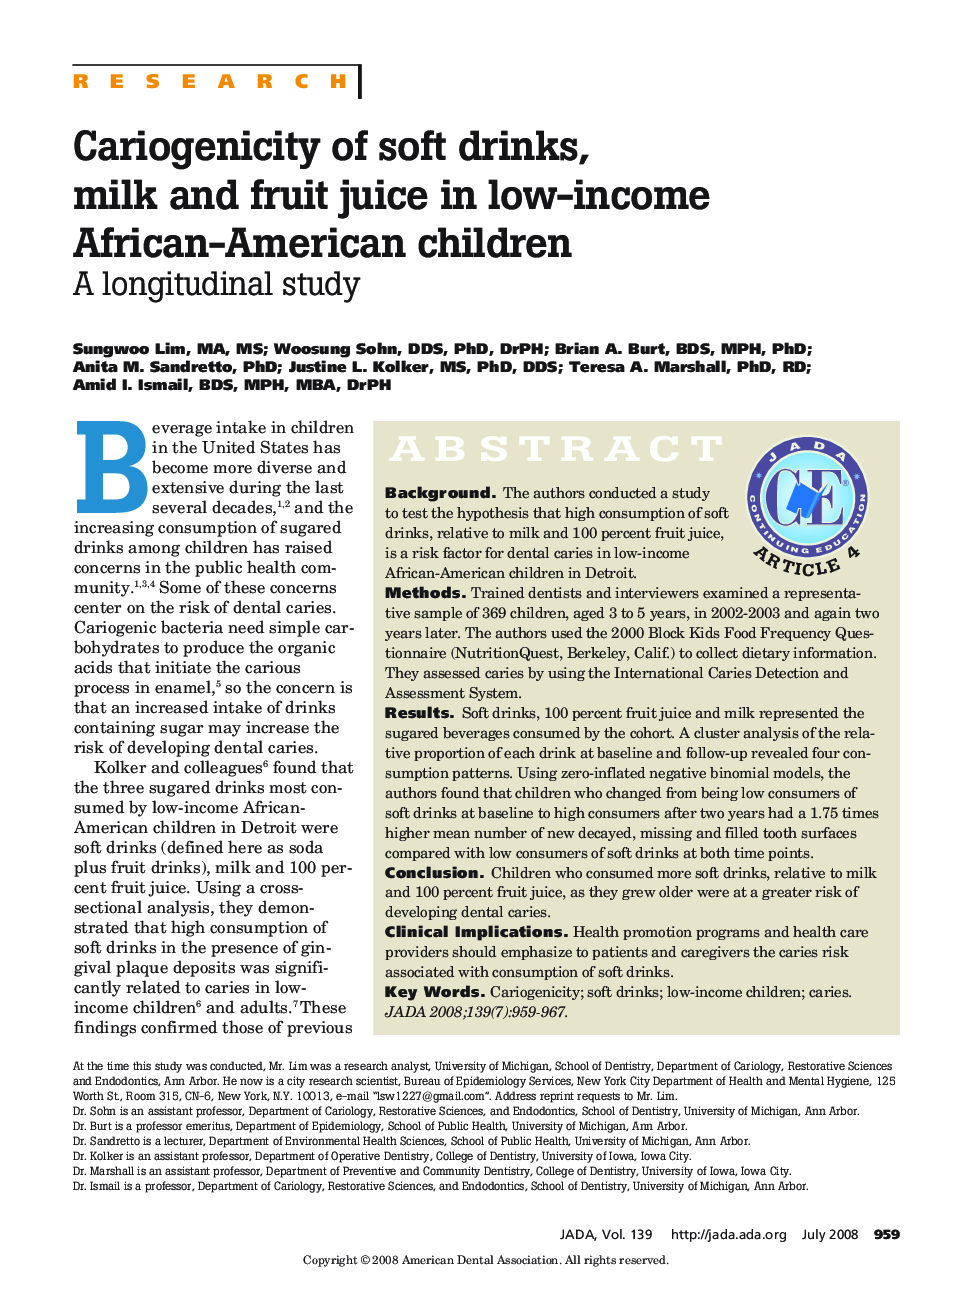 Cariogenicity of Soft Drinks, Milk and Fruit Juice in Low-Income African-American Children : A Longitudinal Study